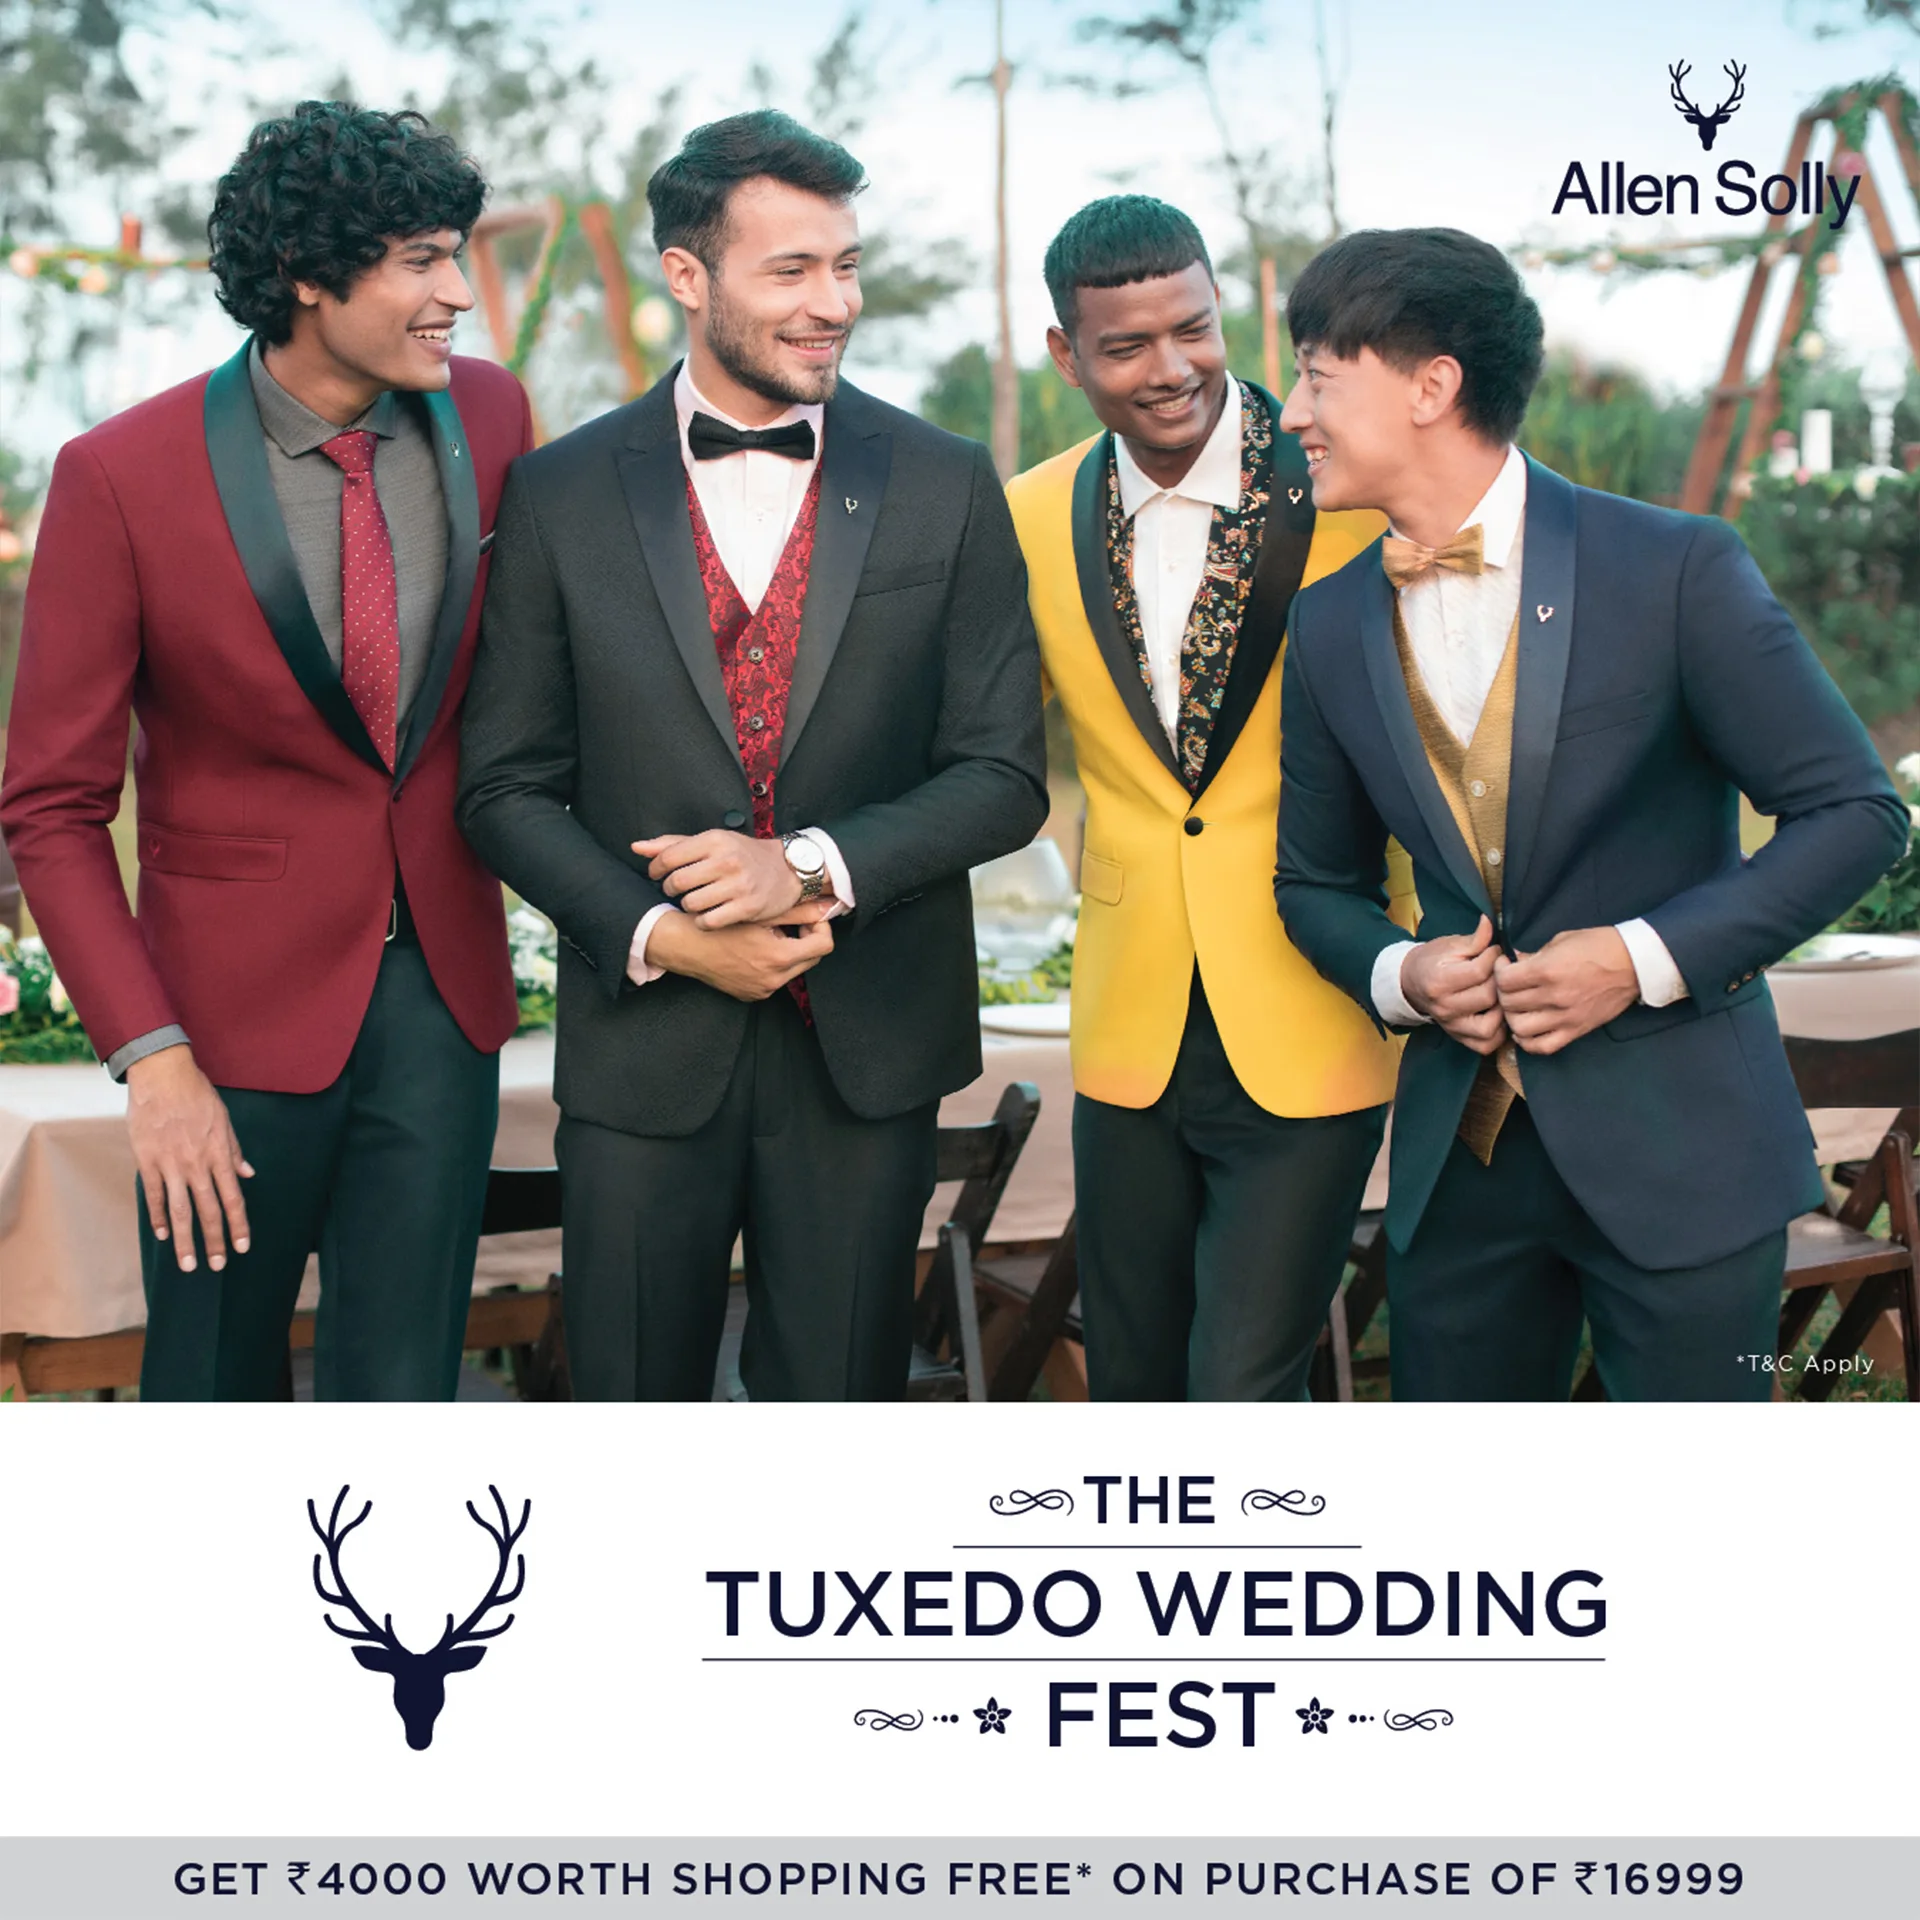 Grooms, Steal The Show! Allen Solly's Tuxedo Wedding Collection sets the  style bar high with neo-classic designs! - WeddingSutra